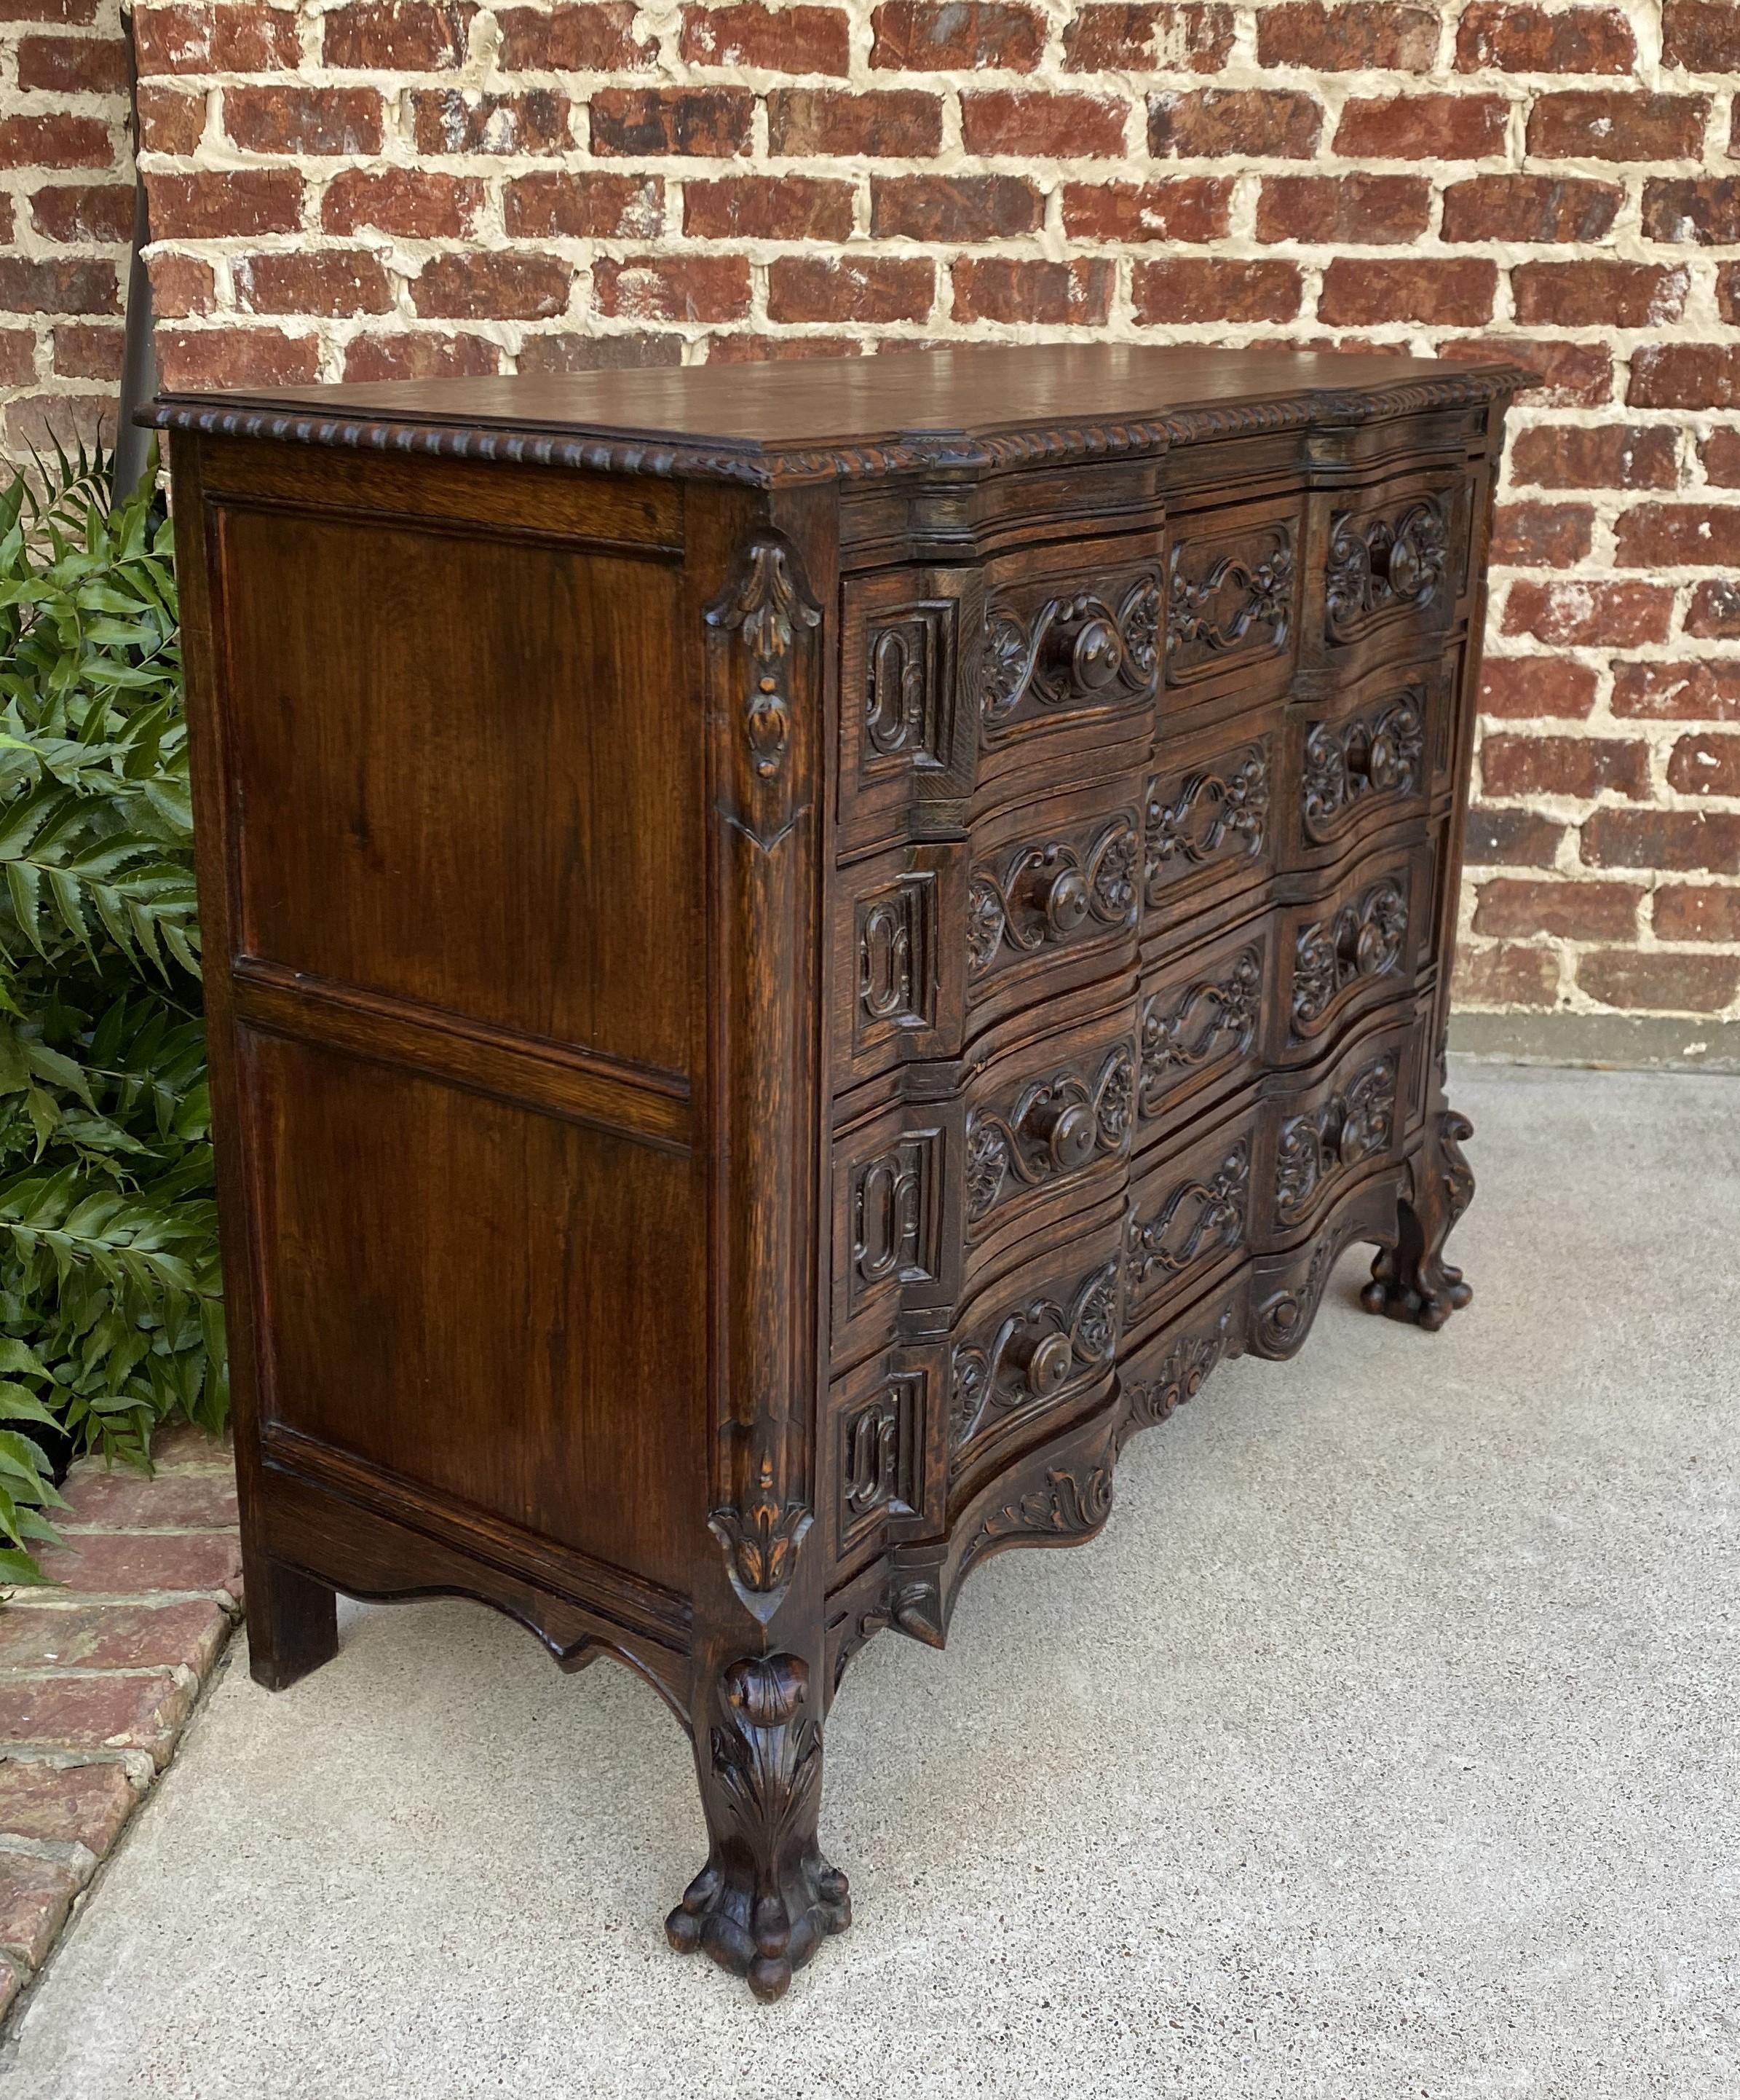 Exquisite antique French oak 19th century Renaissance chest of drawers or commode~~c. 1890s-1900
This is only one of multiple exquisite pieces recently received from our European shipper~~wonderful hand-carved oak pieces in the highly sought after